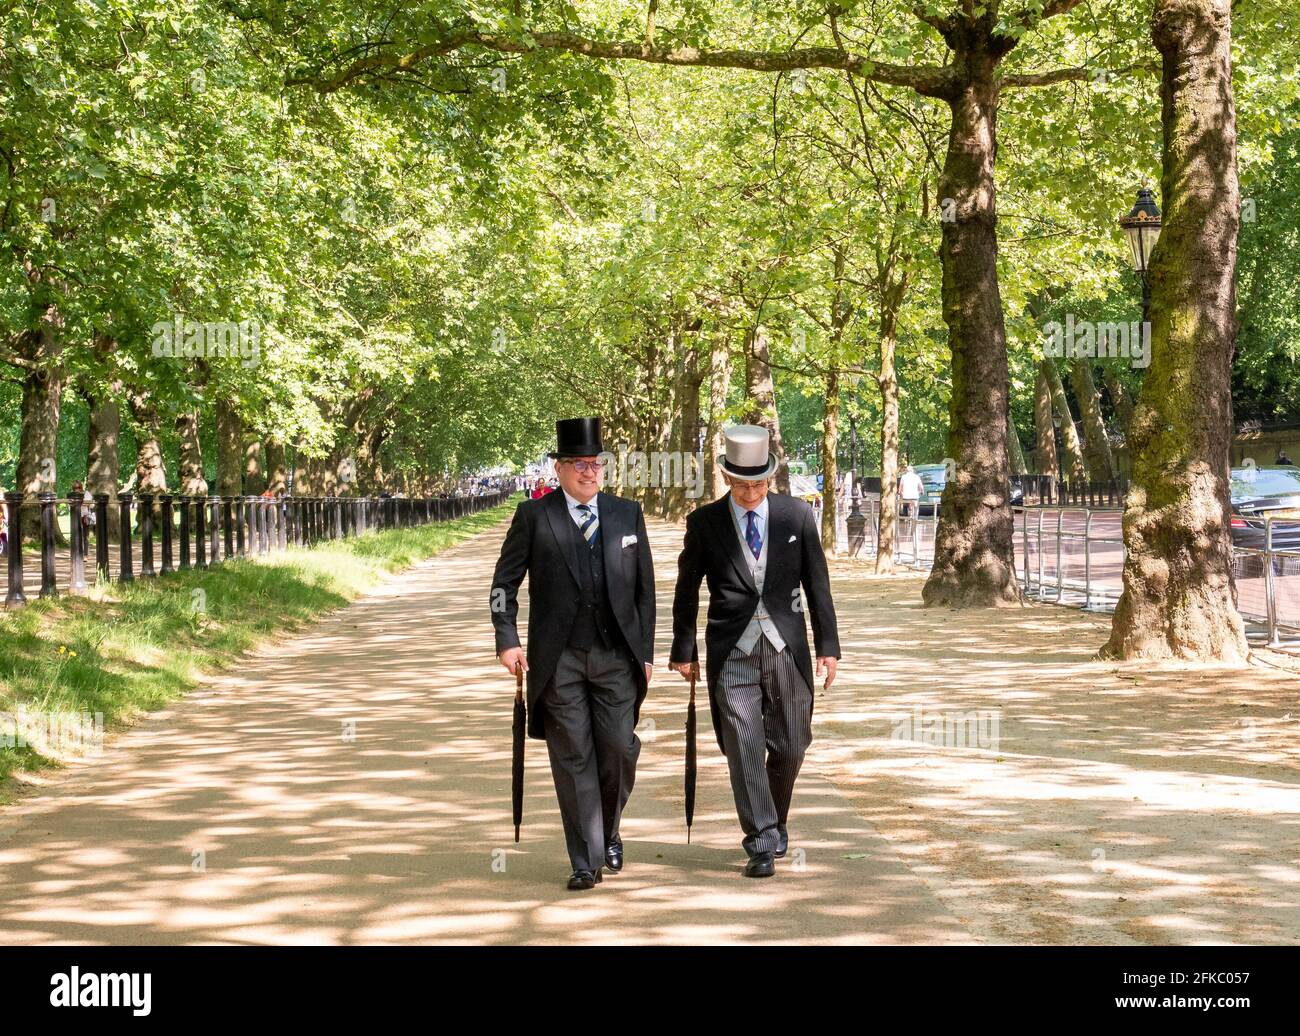 Men in morning suit and top hats strolling down Constitution Hill alongside Green Park, London, UK Stock Photo